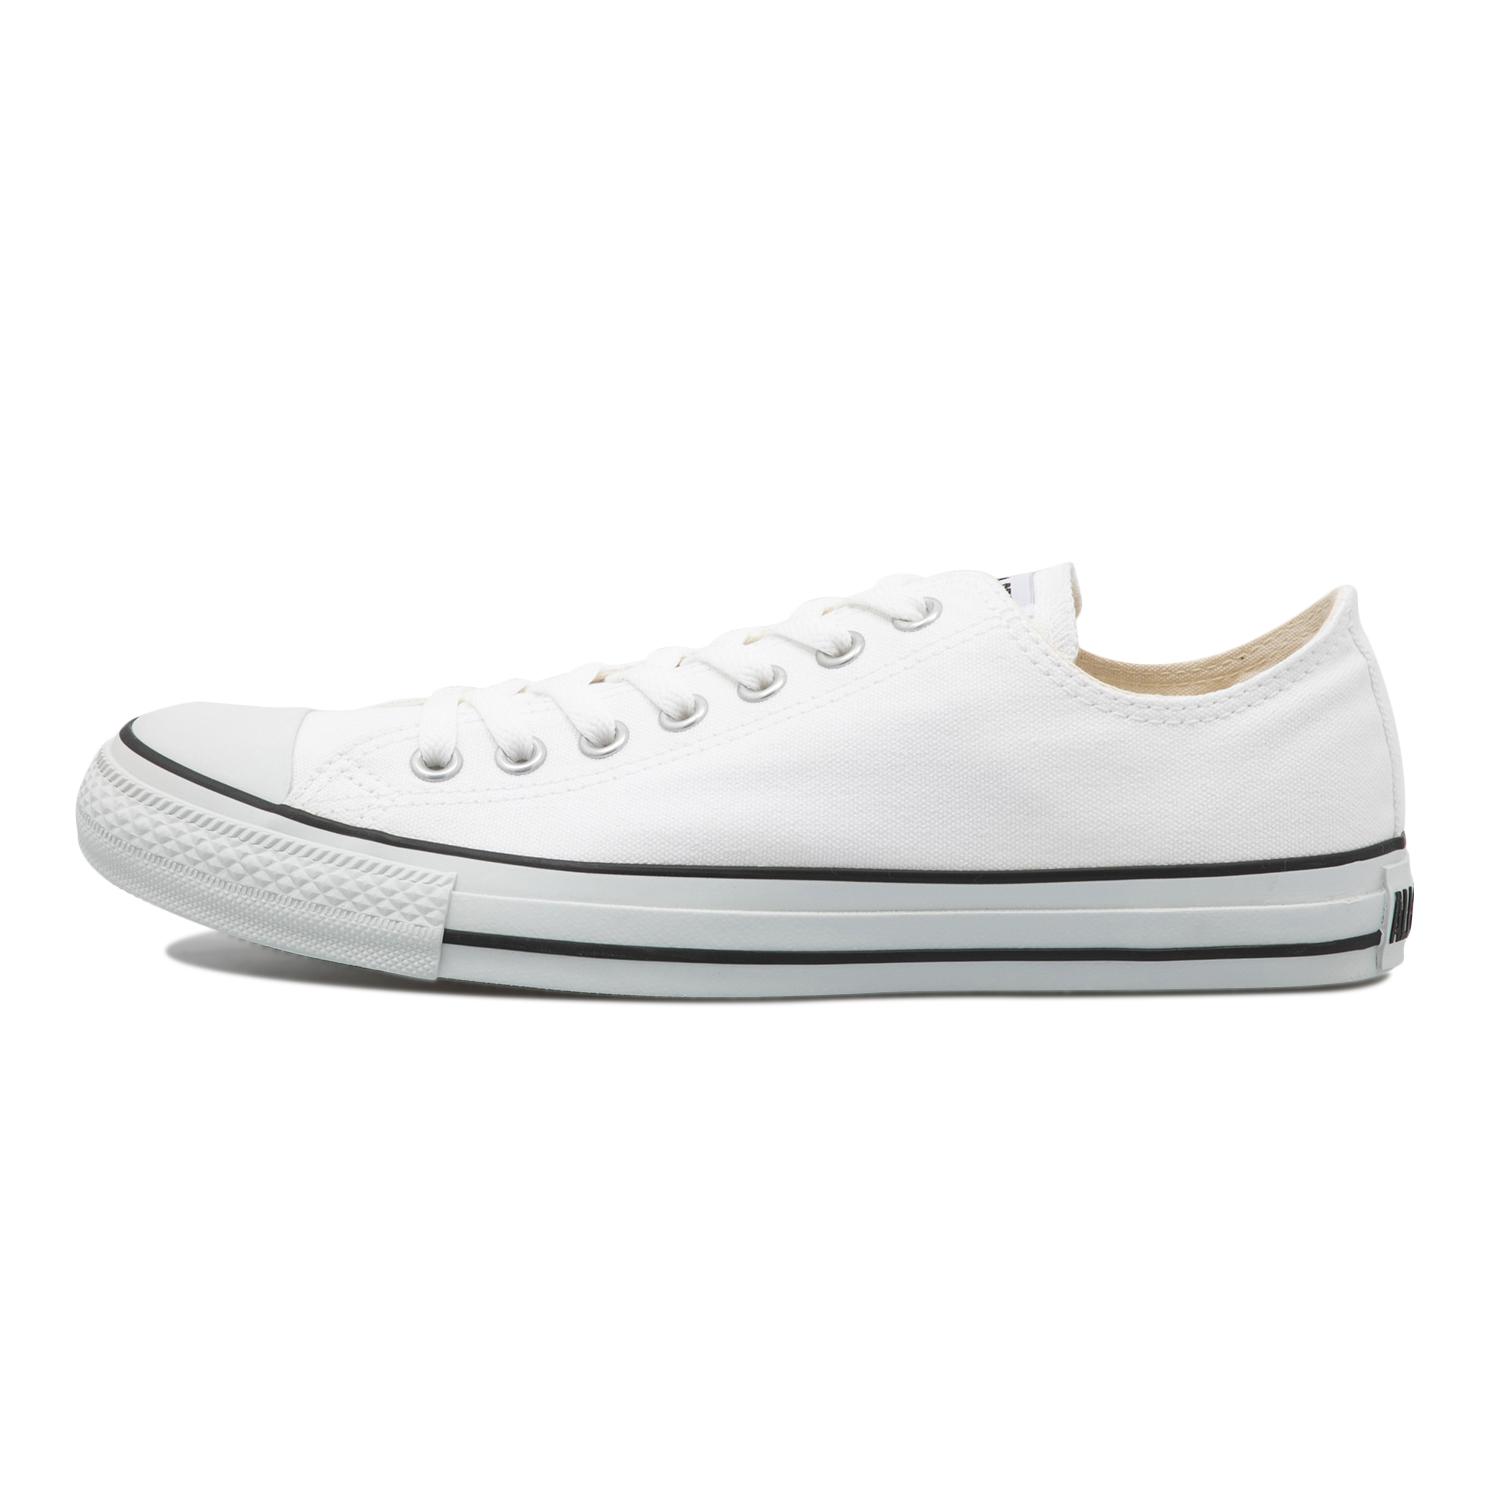 【CONVERSE】 コンバース CANVAS ALL STAR COLORS OX キャンバス オールスター カラーズ OX 32860660 WHT/BLK